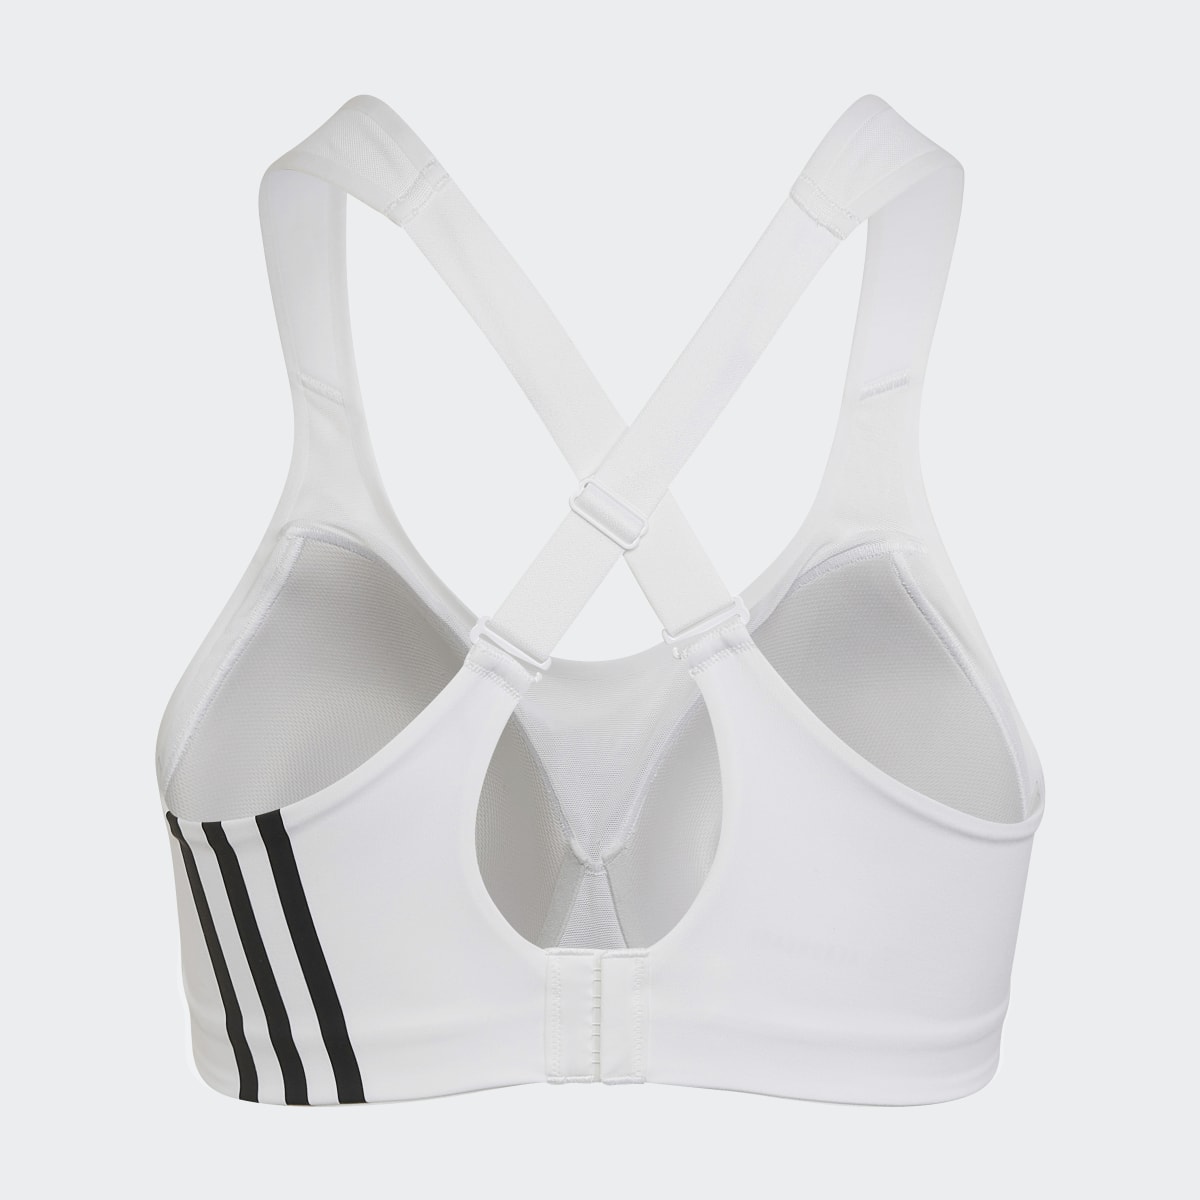 Adidas TLRD Impact Training High-Support Bra (Plus Size). 6